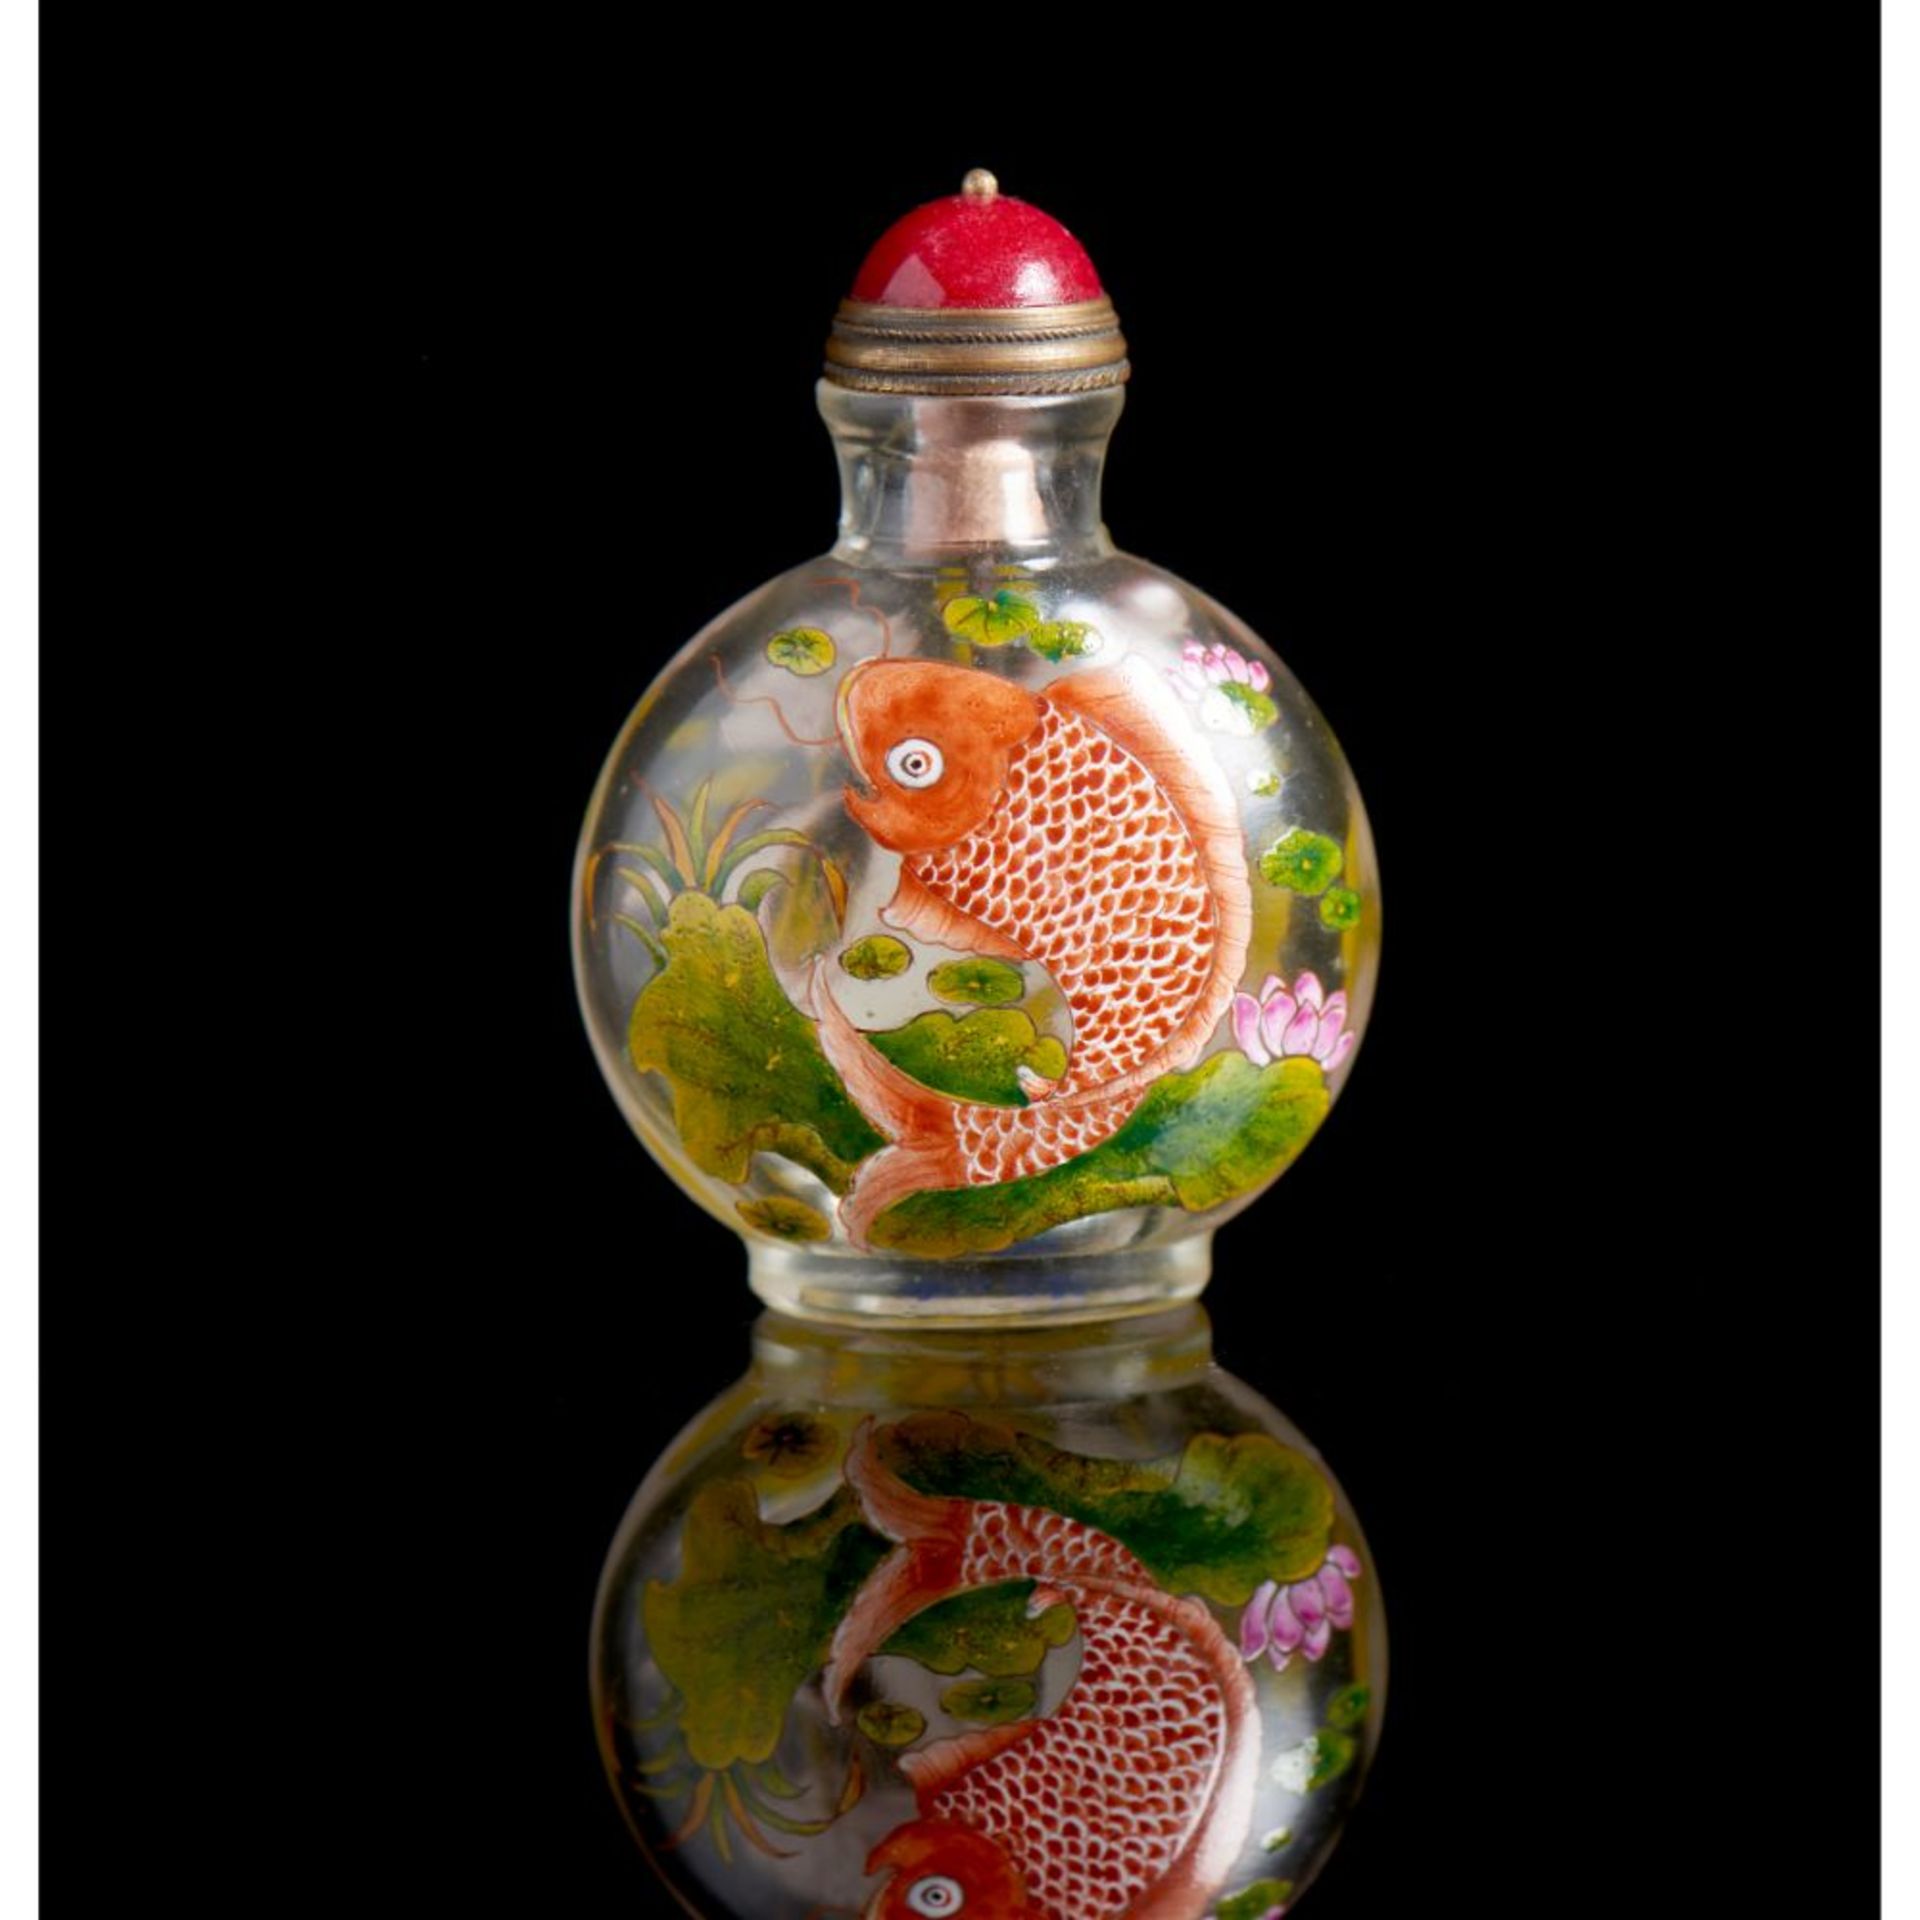 A painted glass snuff bottle